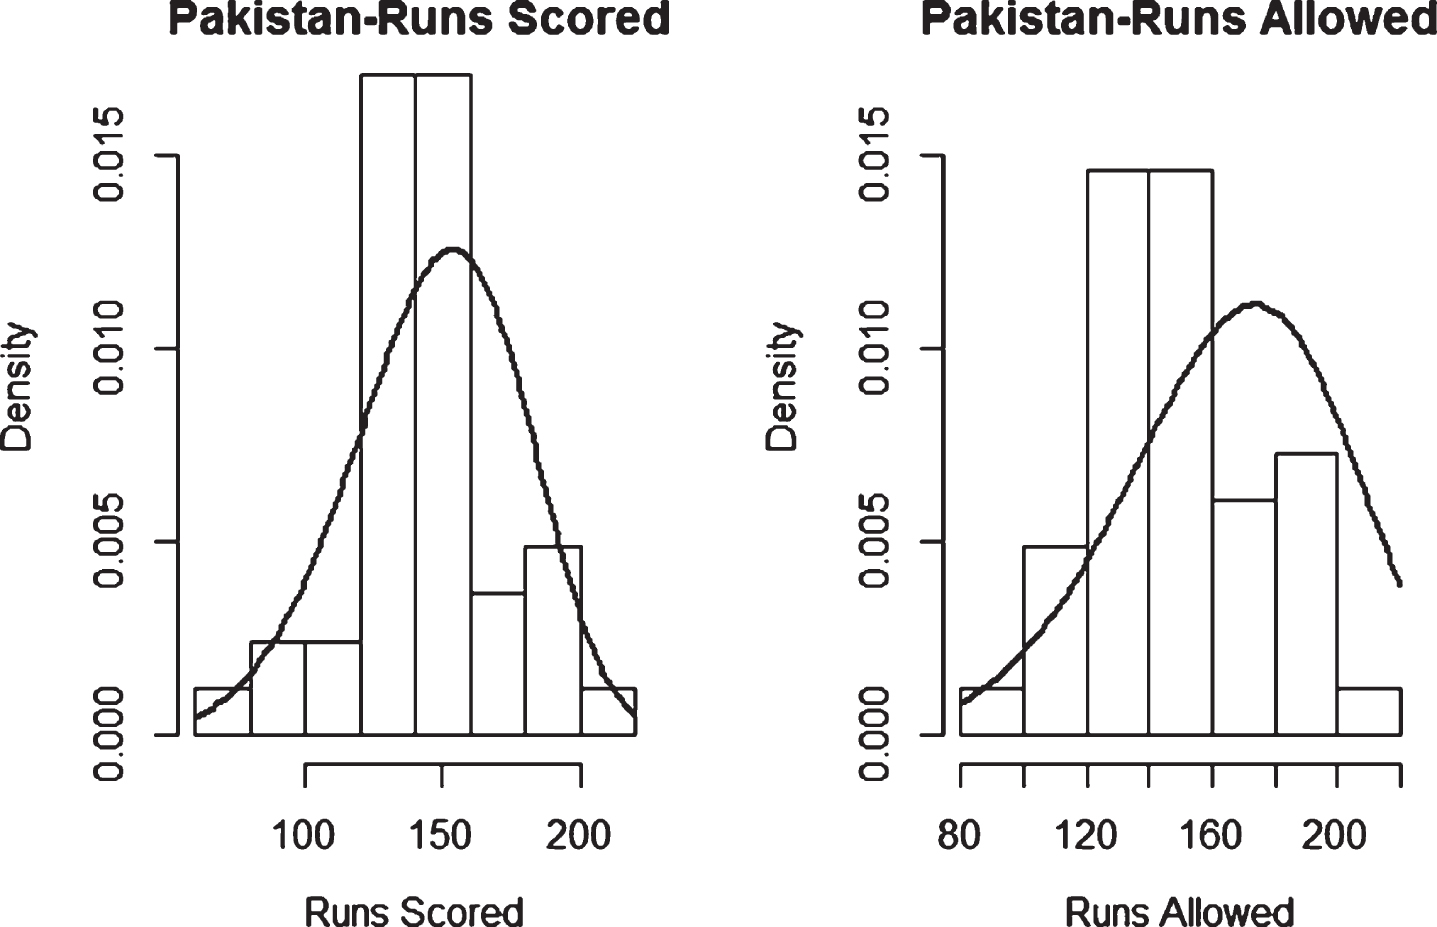 Weibull Distribution Fit for Runs Scored and Runs Allowed for Pakistan using Least Squares Method (Twenty20).